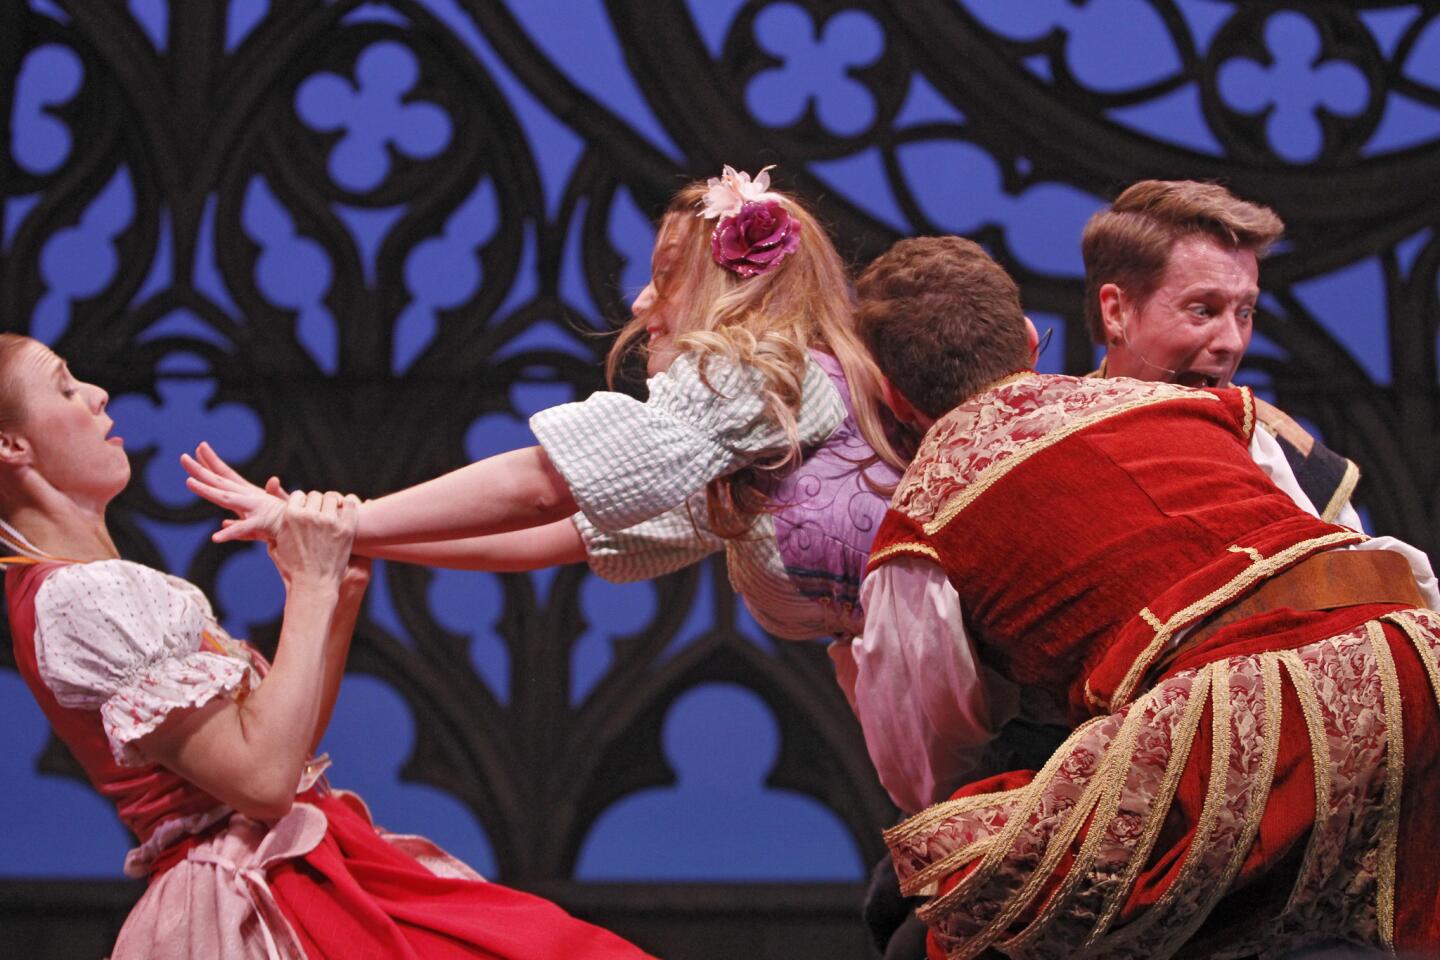 Theatrical Education Group's Shakespearience actors, left, to right, Alyson King as Helena, Lindsey Scott as Hermia, Bryce Lourie as Demetrius and Justin Eick as Lysander perform A Midsummer Night's Dream for a full house of students at the Alex Theater in Glendale on Tuesday, Jan. 20, 2015.